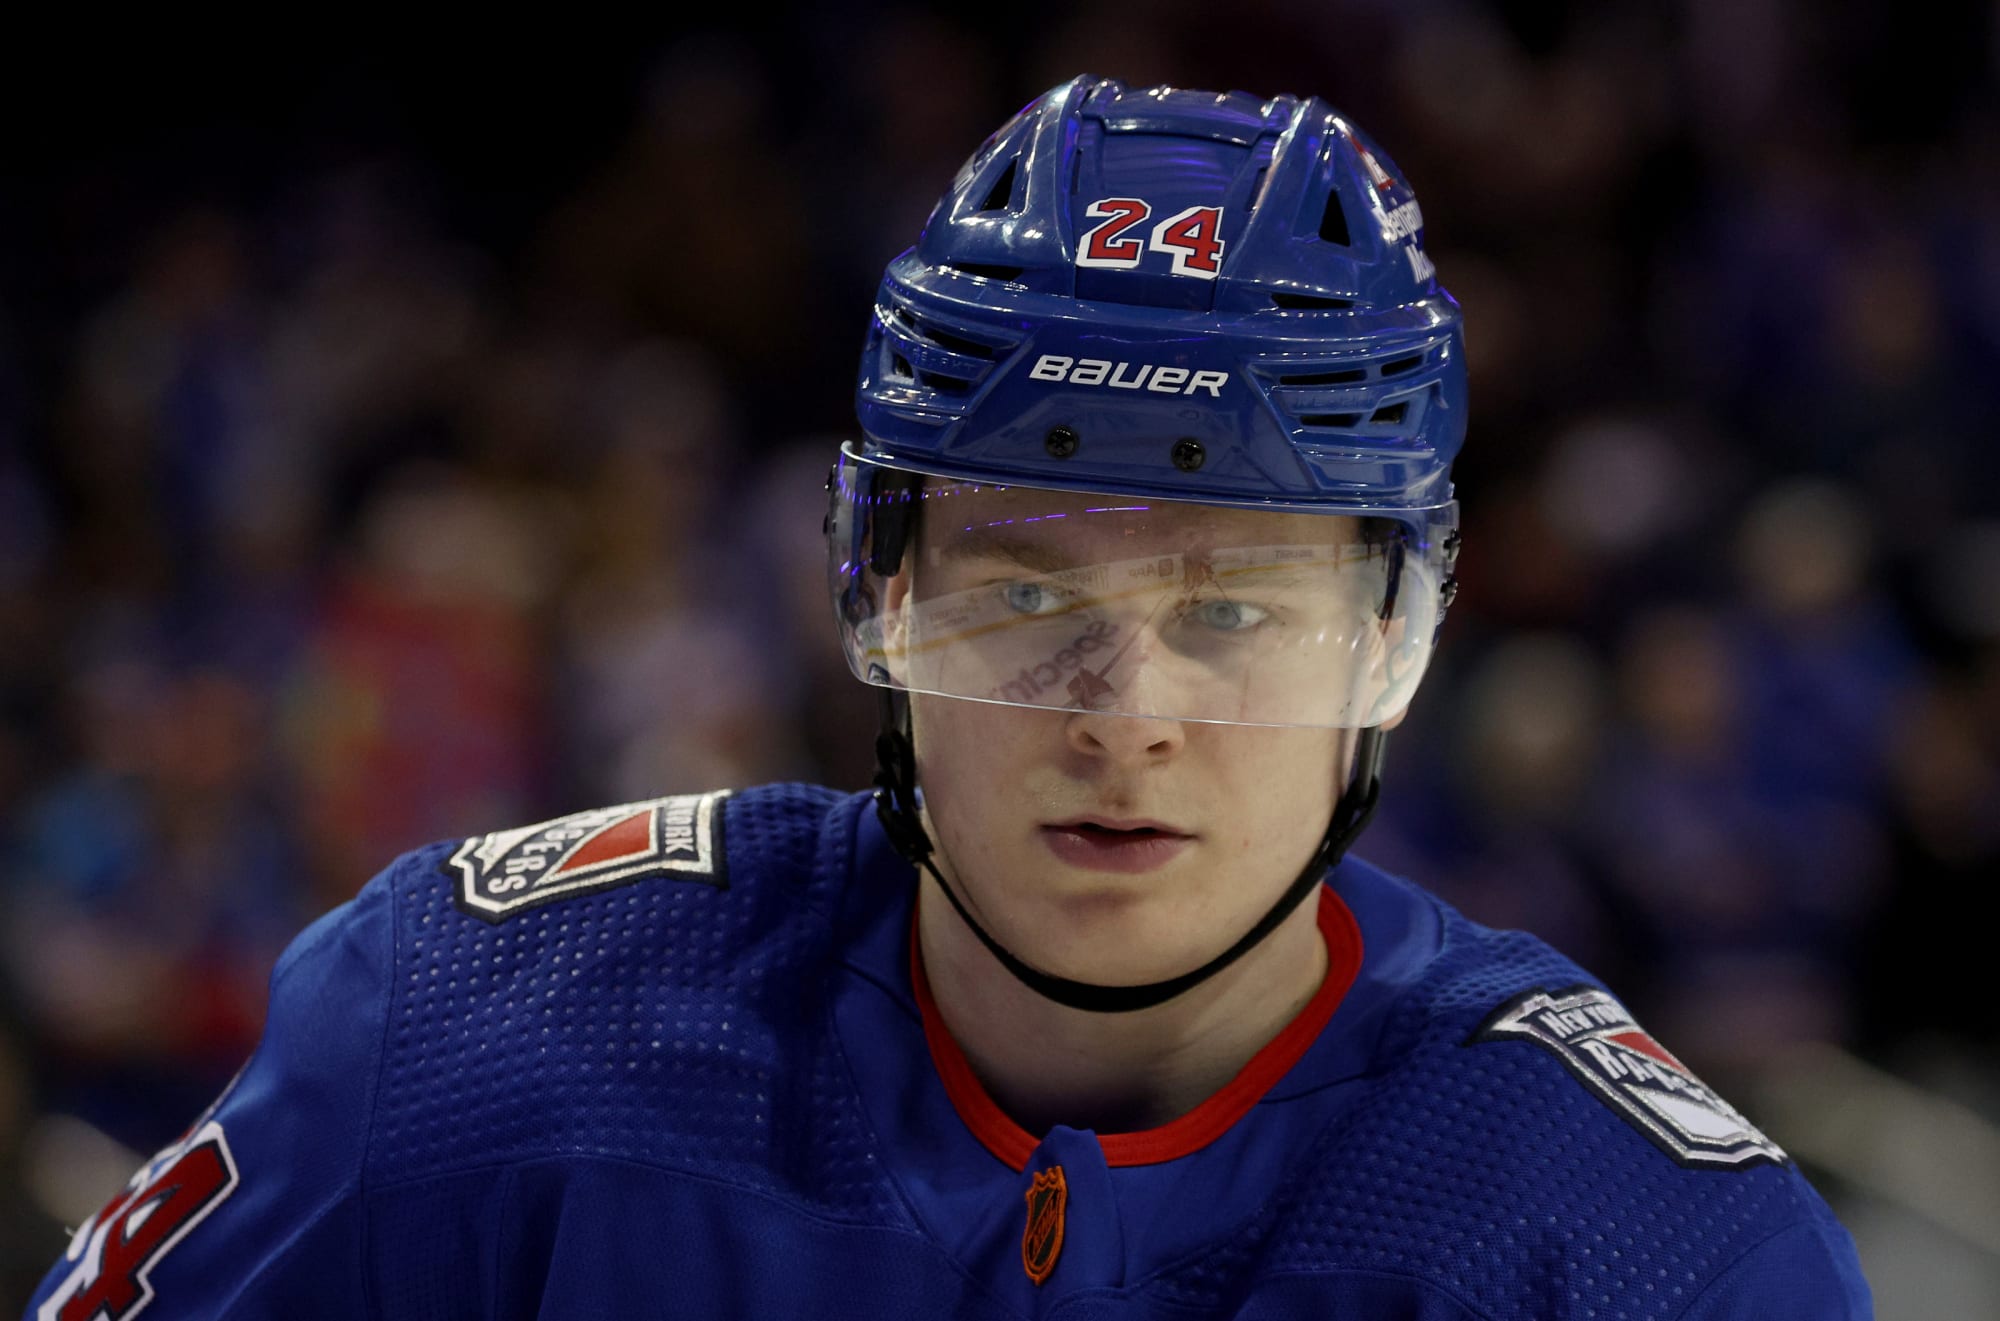 Questions about Kaapo Kakko's future with New York Rangers